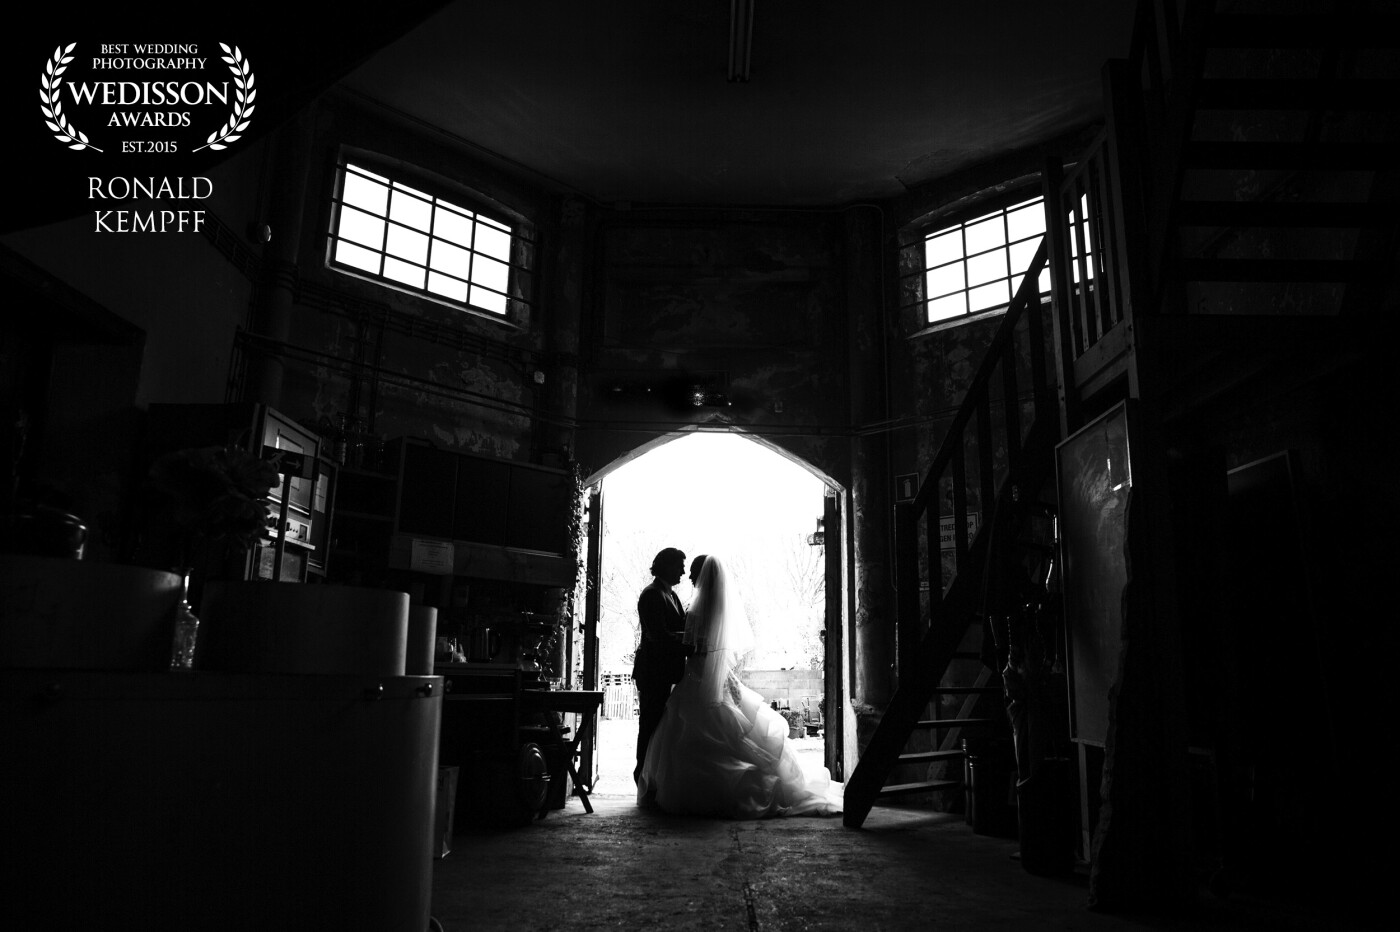 This picture was taken in a former church in the Netherlands. You can hire the church for events or a foto shoot. This scenery was at the back of the church and is in use for storage. But the incoming light of the doors and windows made this special.